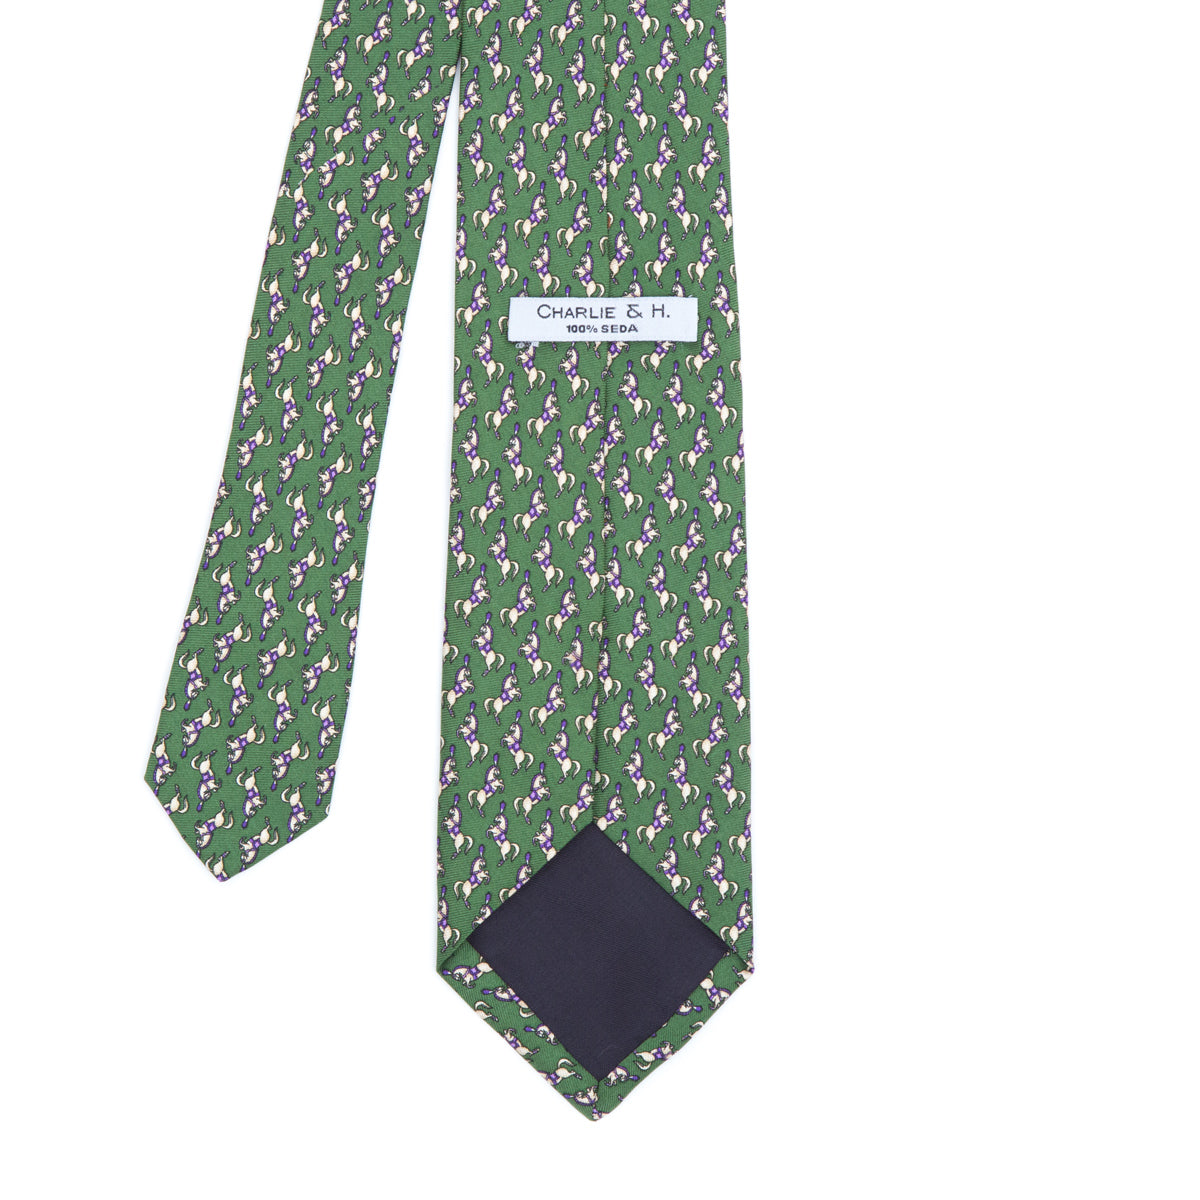 Stable tie